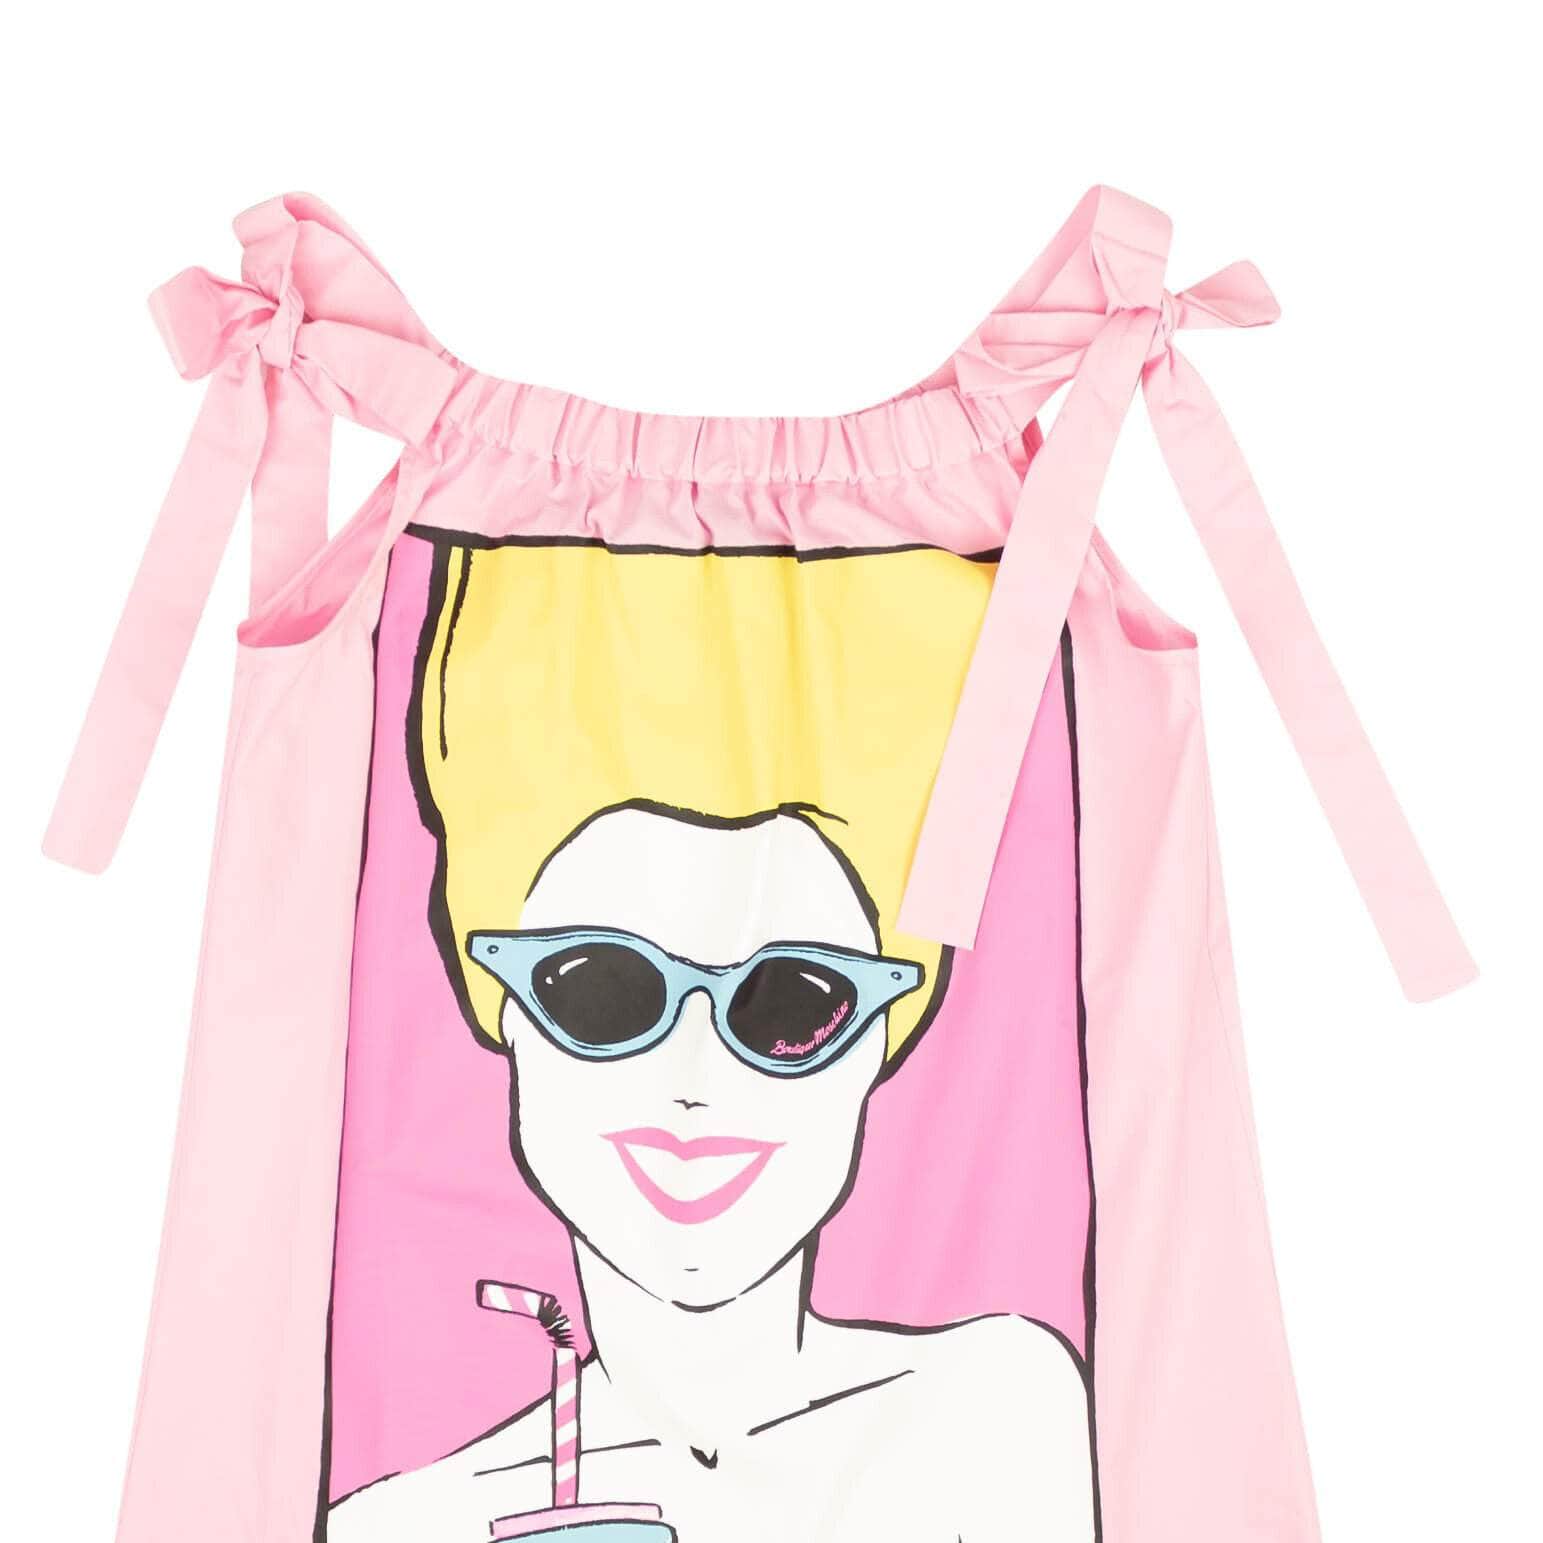 BOUTIQUE MOSCHINO boutique-moschino, channelenable-all, chicmi, couponcollection, gender-womens, main-clothing, size-36, size-38, size-40, size-42, under-250, womens-blouses Pink Summer Woman Tie Strap Sleeveless Top